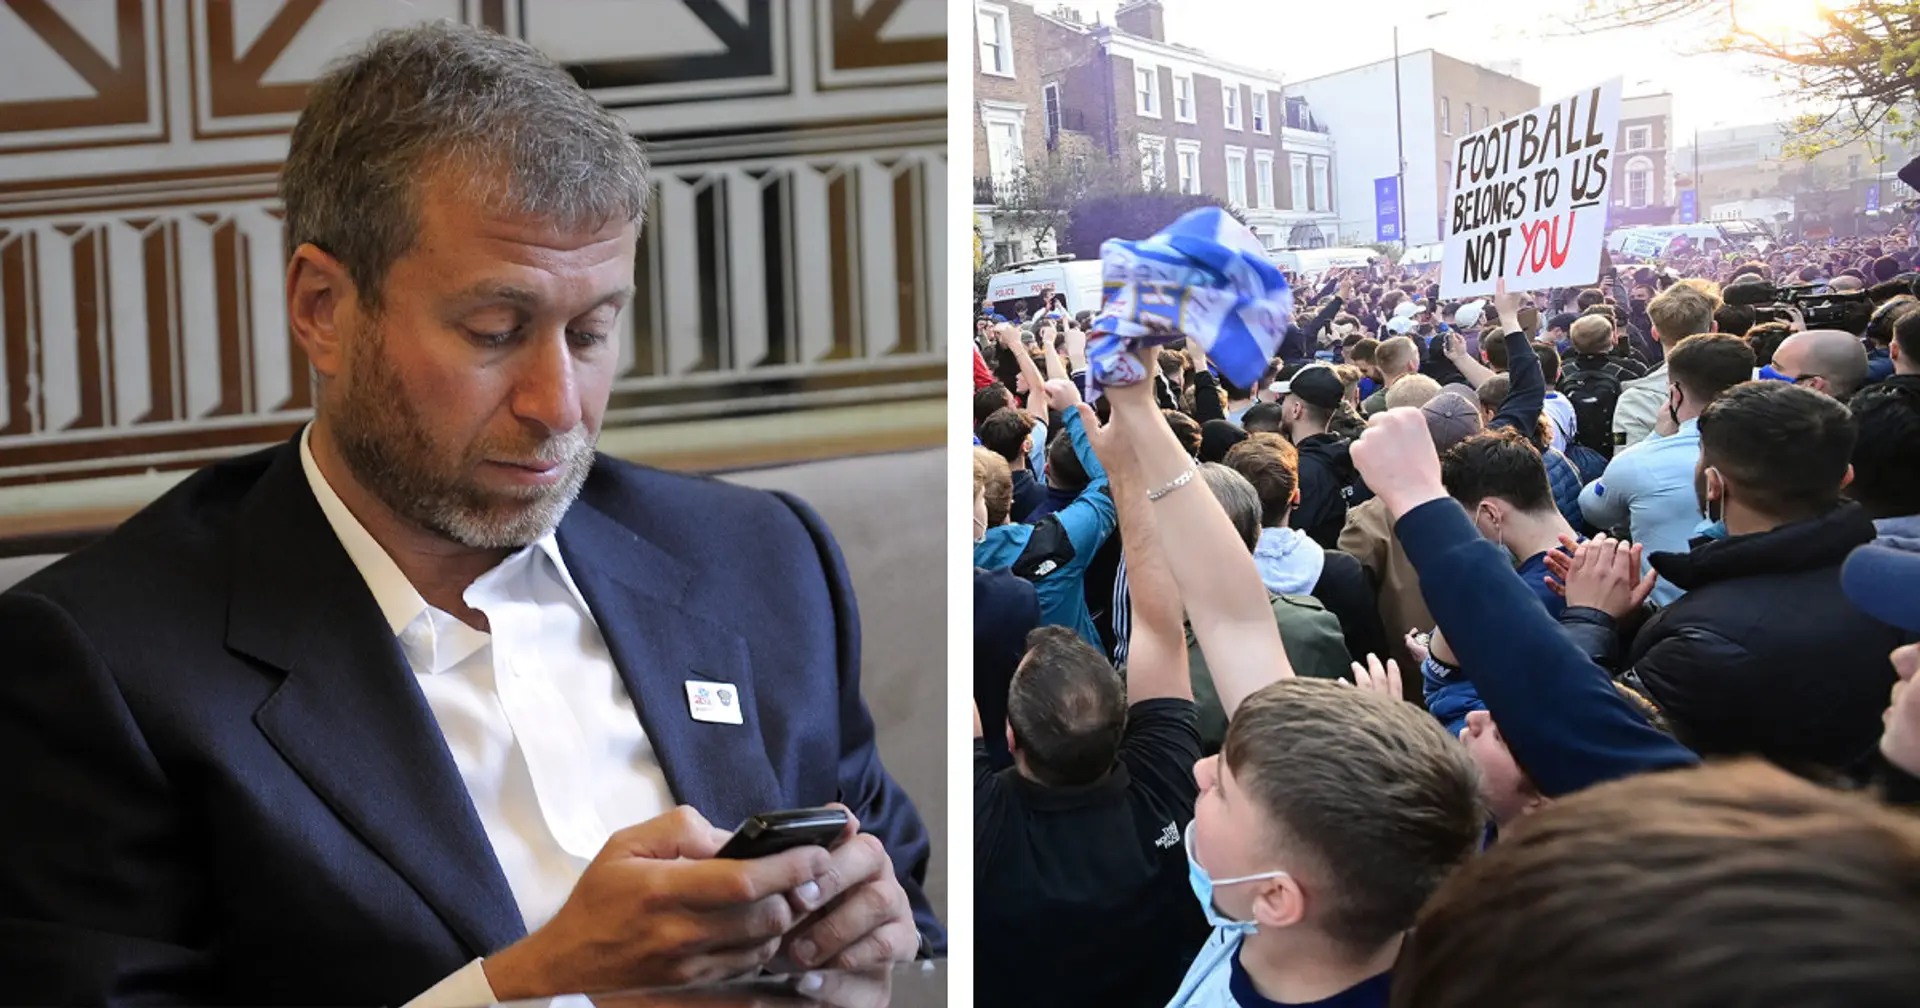 'Need Roman to do a YouTuber style apology video': fans react after Chelsea confirm Super League exit